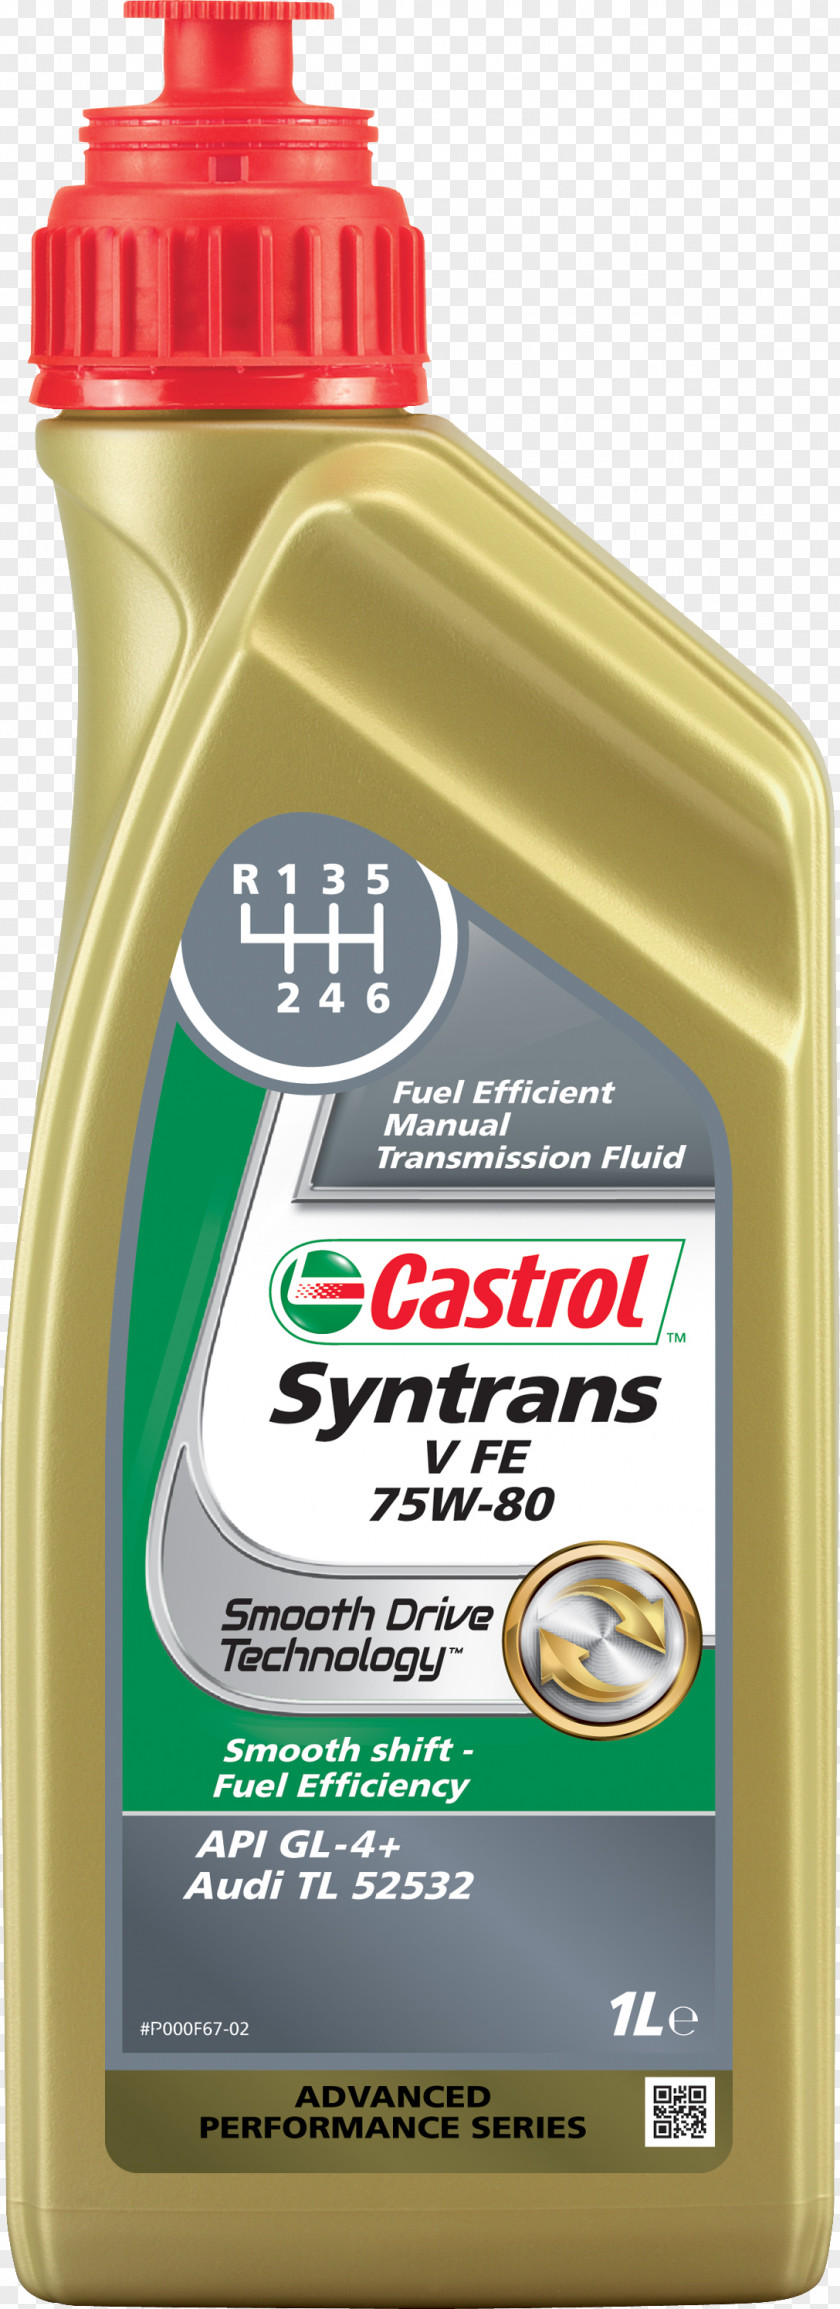 Car Gear Oil Synthetic Castrol Transaxle PNG